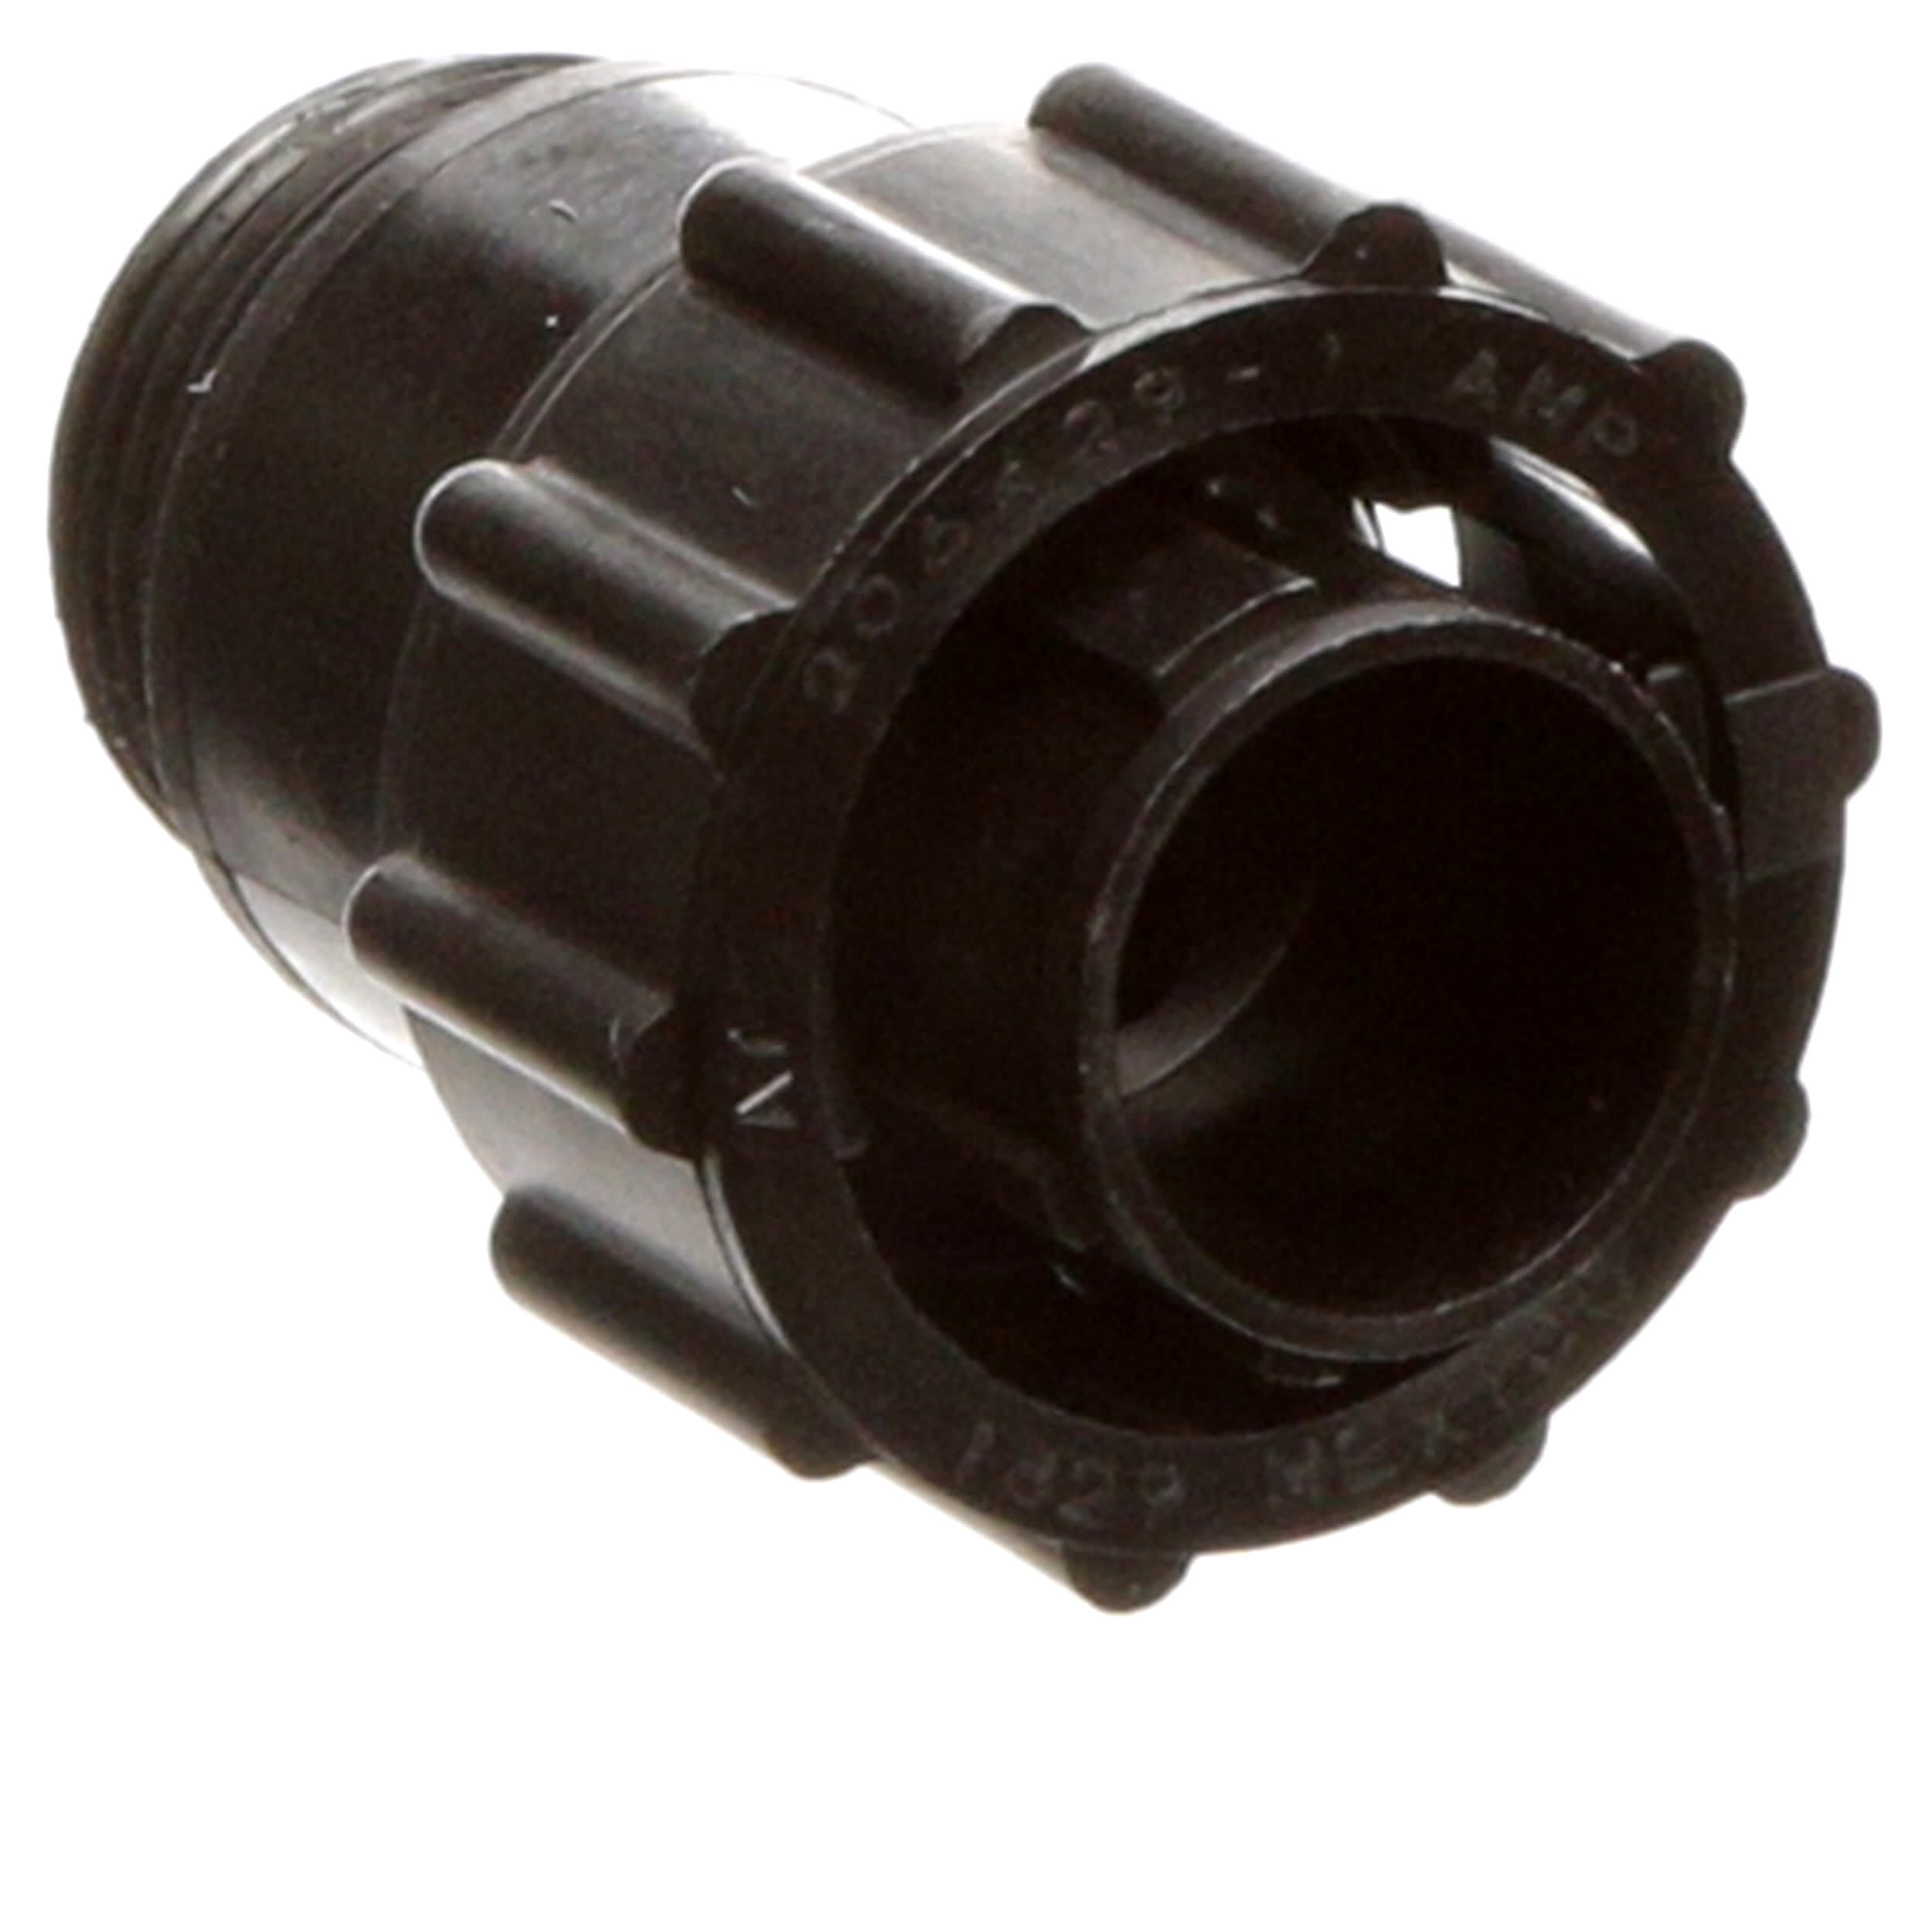 206429-1 Te CONNECTIVITY Tyco Amp Circular Connector Size 11 4pos Plug for sale online 